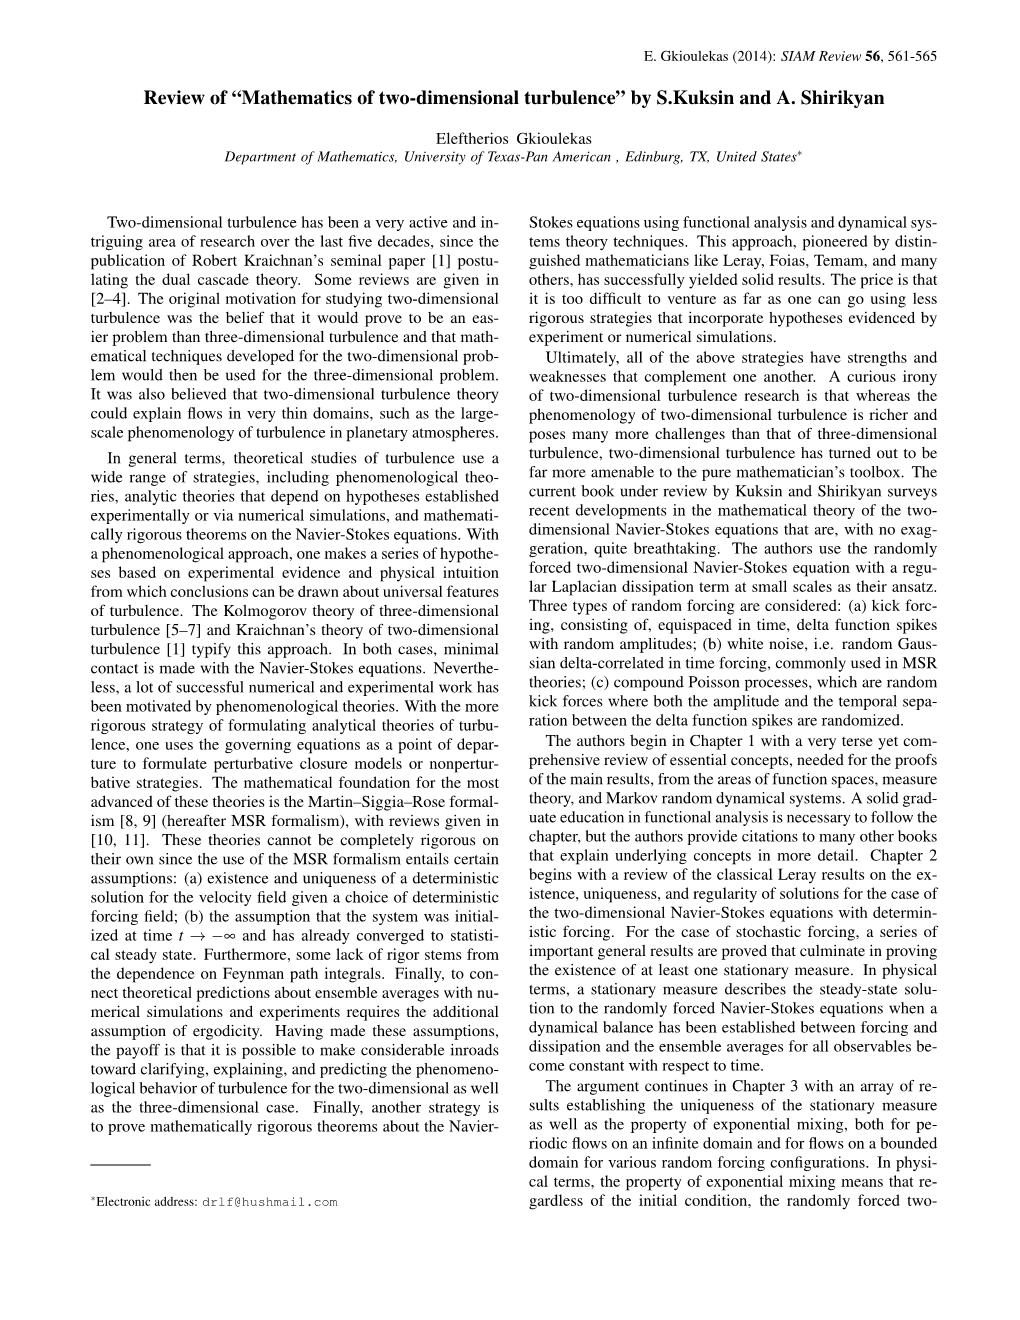 Review of “Mathematics of Two-Dimensional Turbulence” by S.Kuksin and A